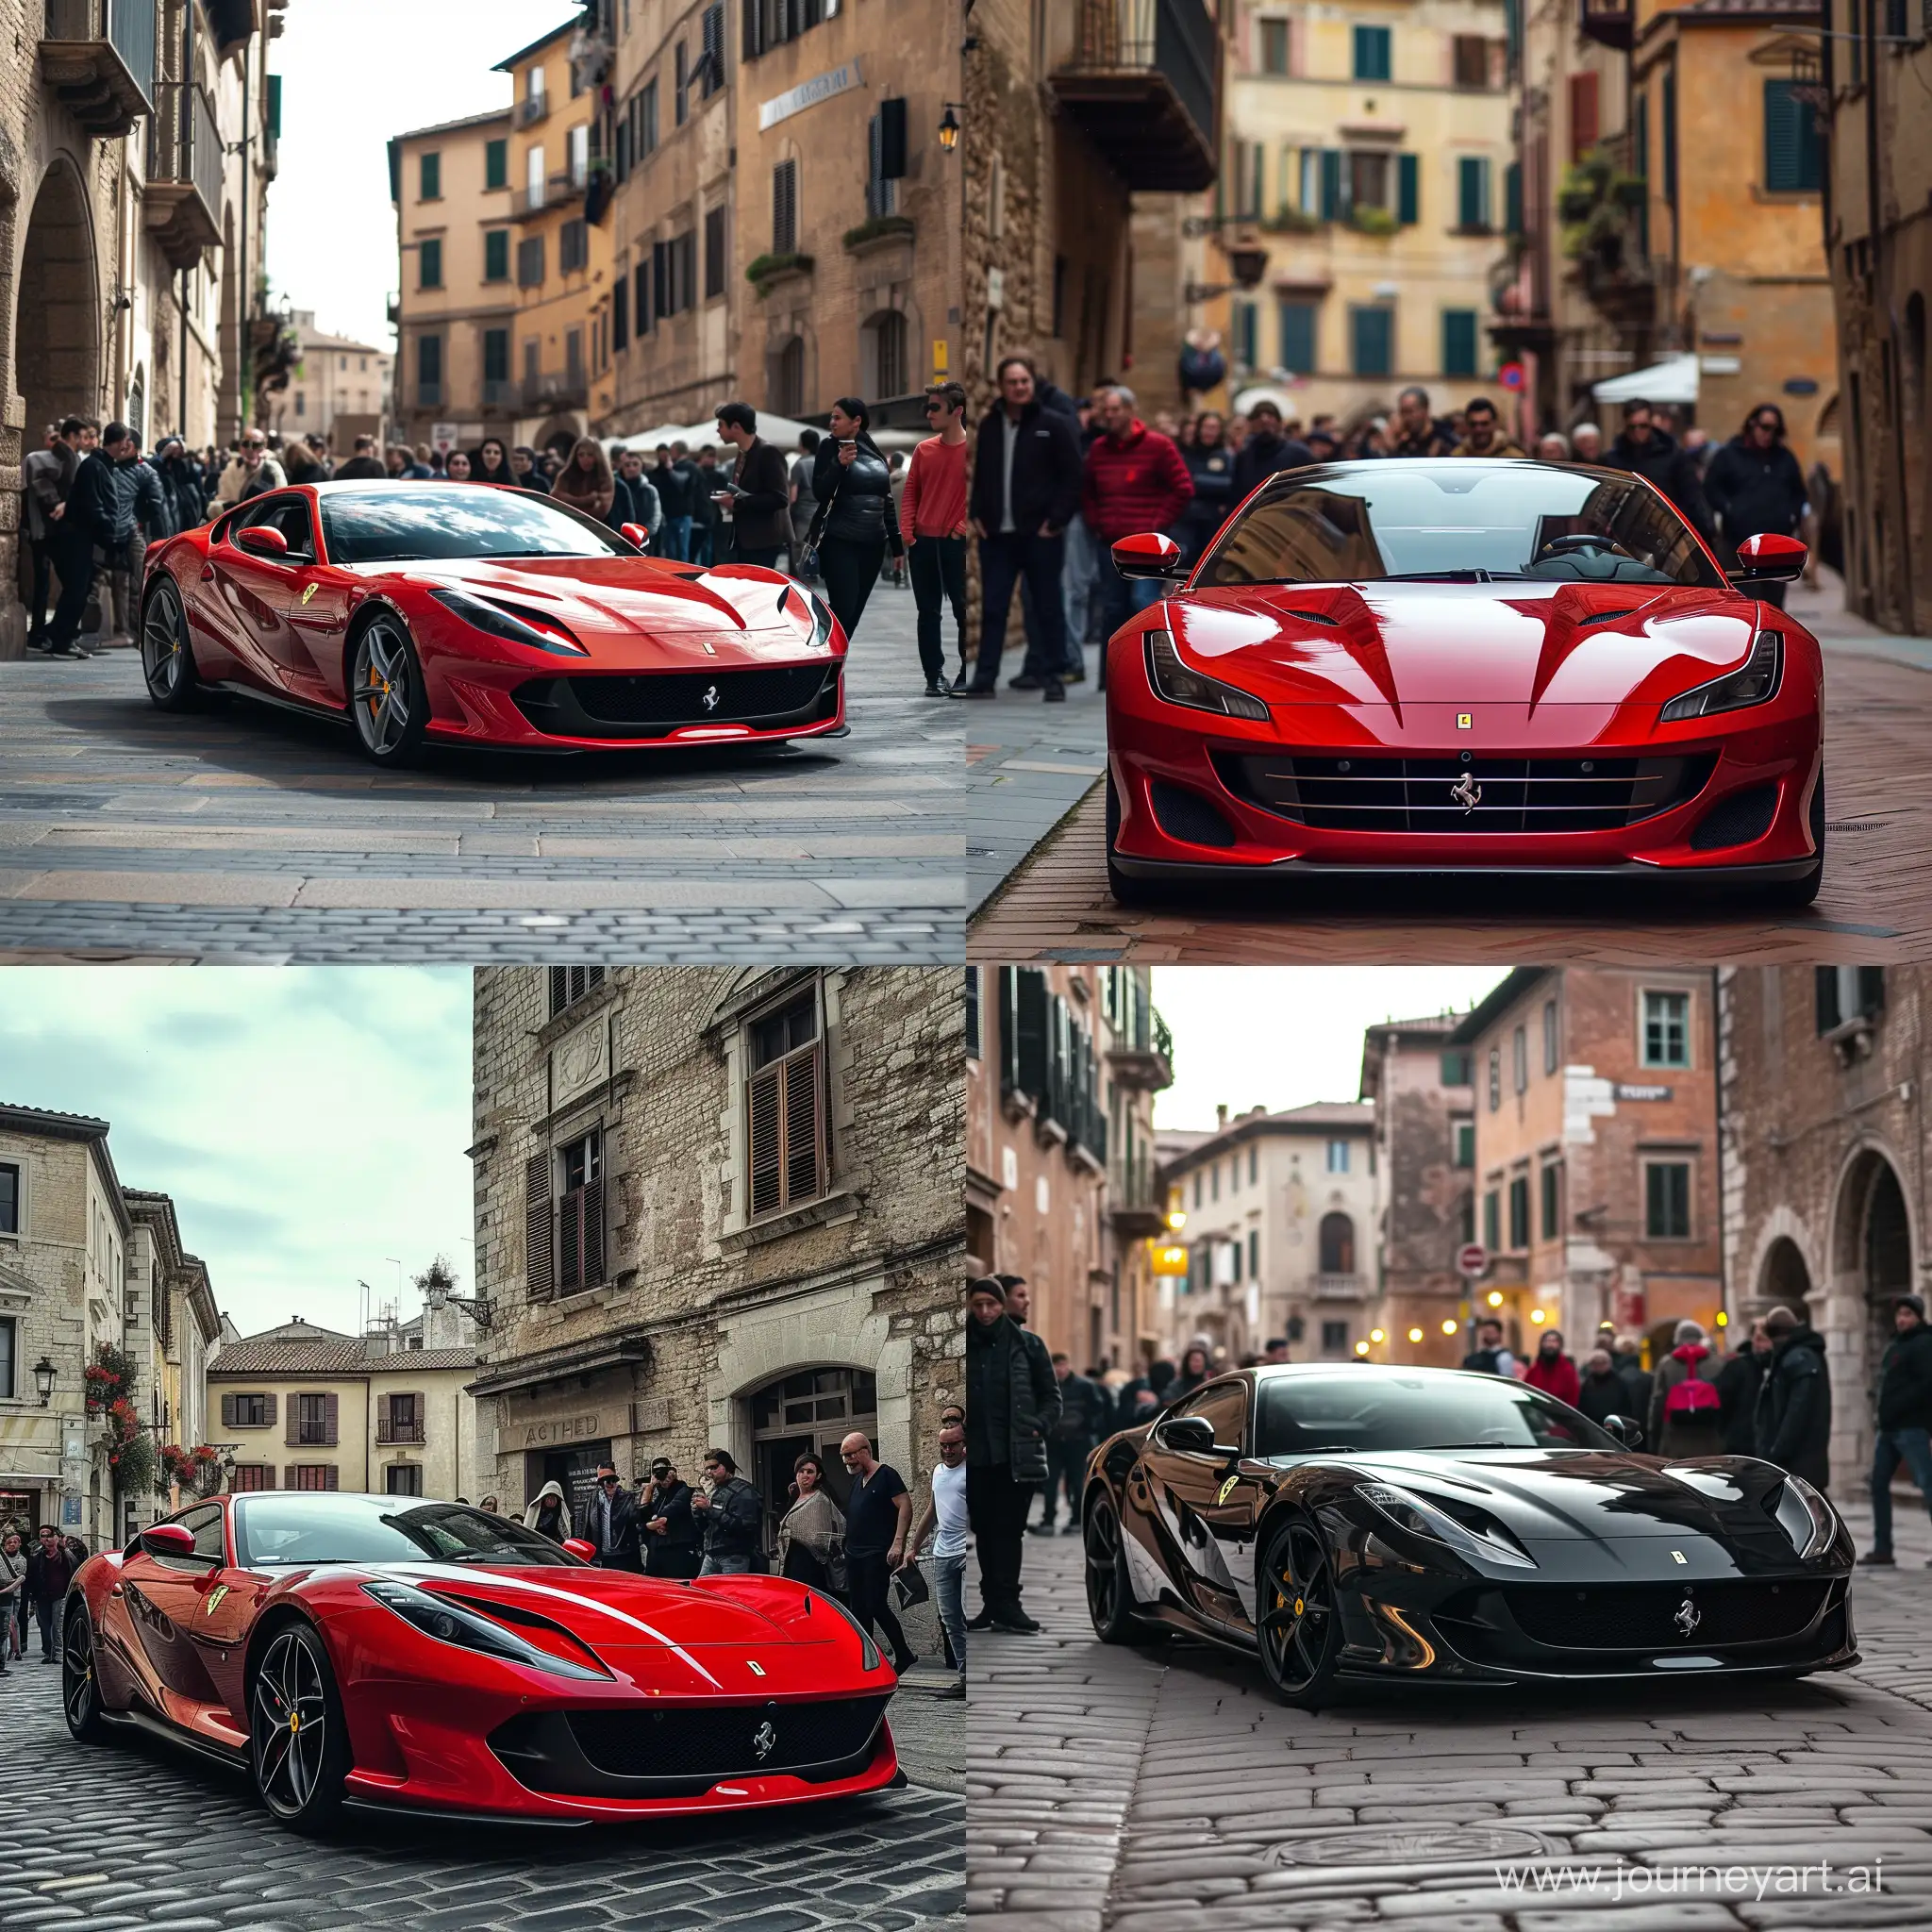 Ferrari on the street of a medieval city, onlookers around